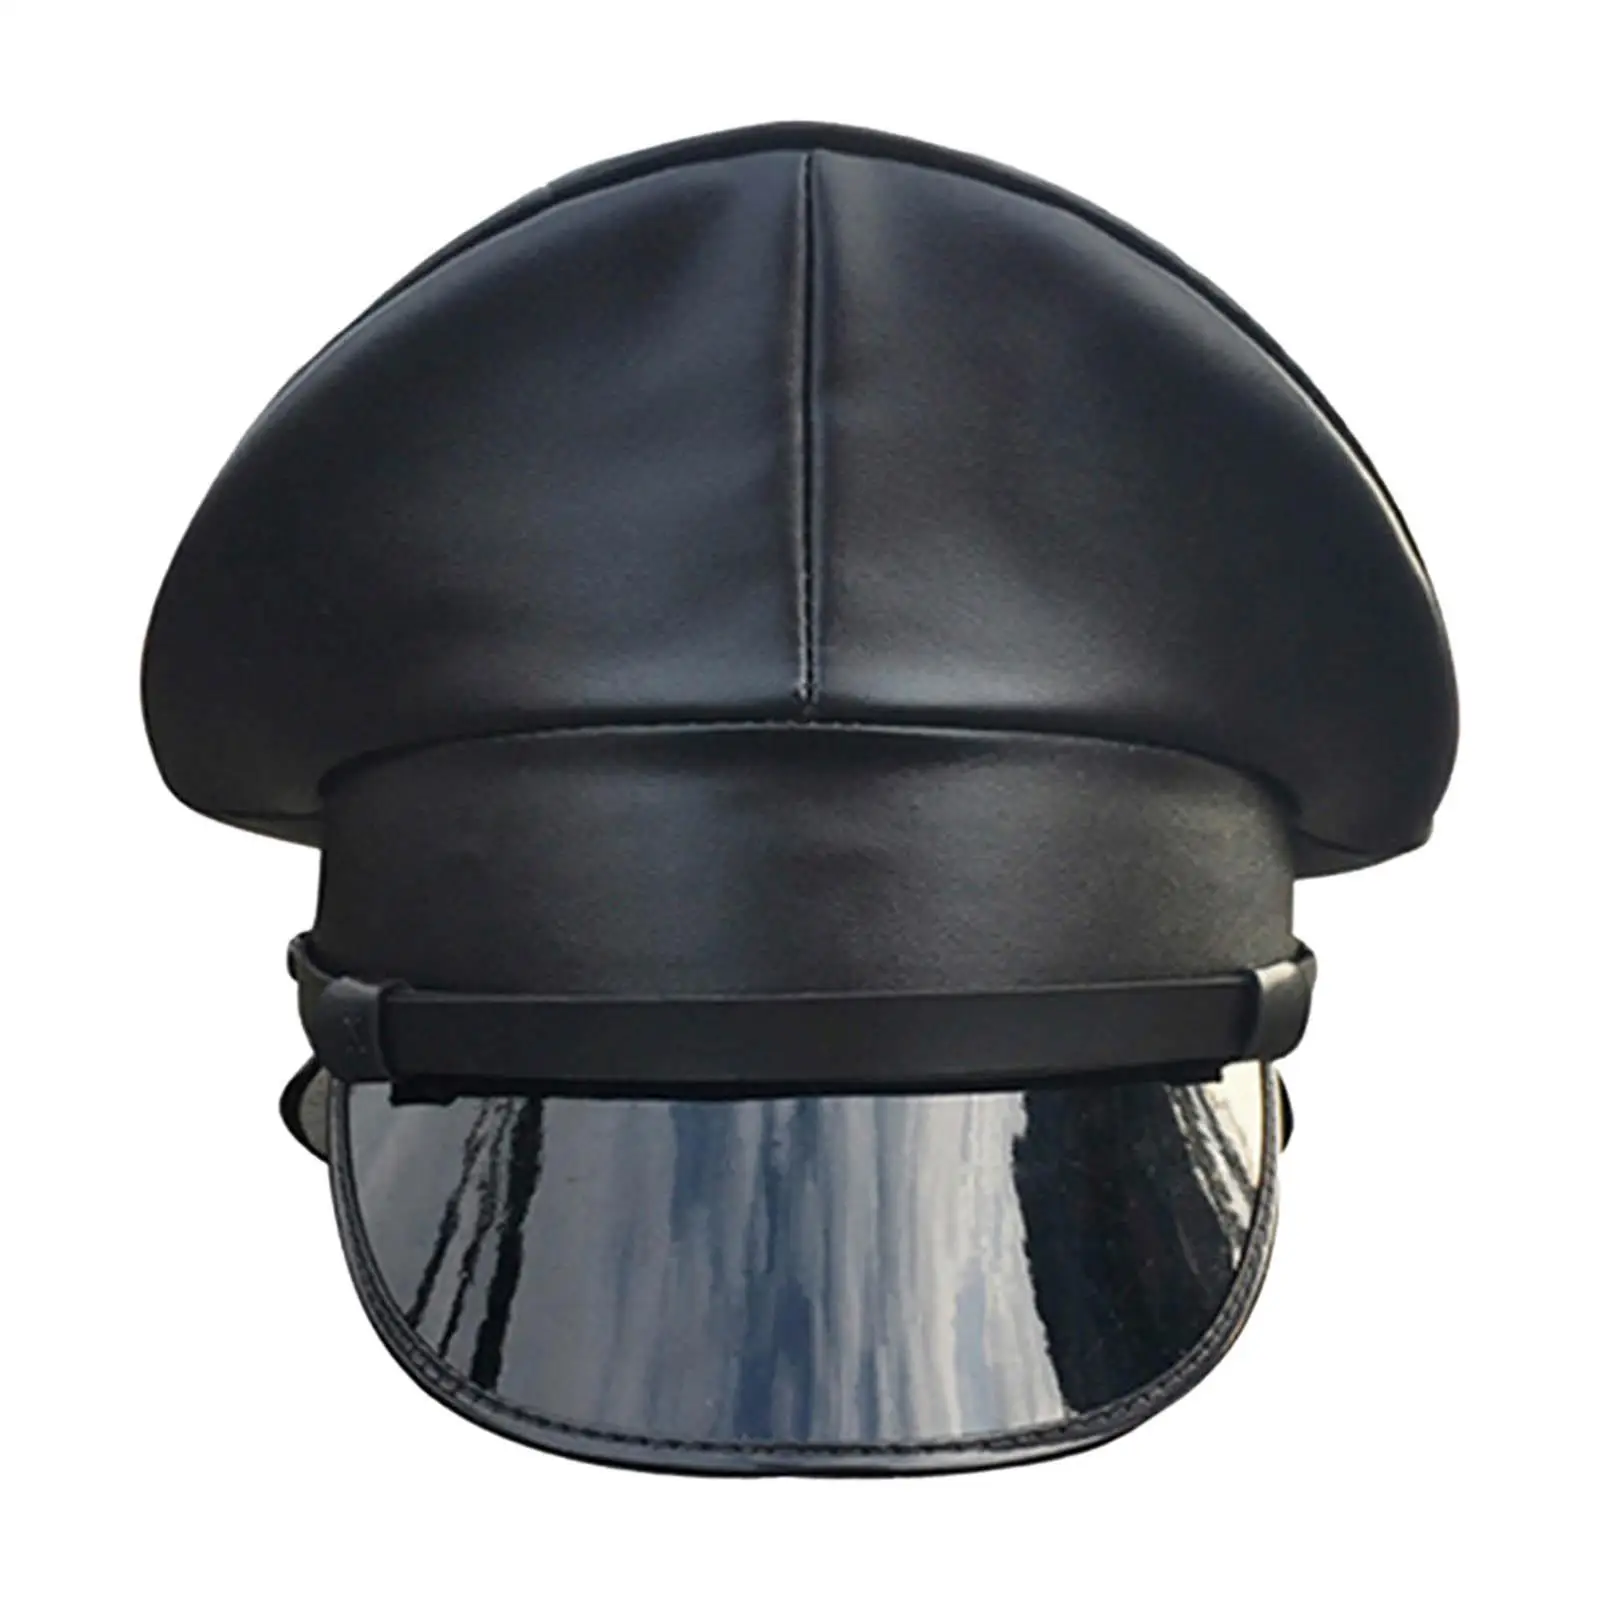  Hat Deluxe Props  PU Leather for Cosplay Halloween Nightclub